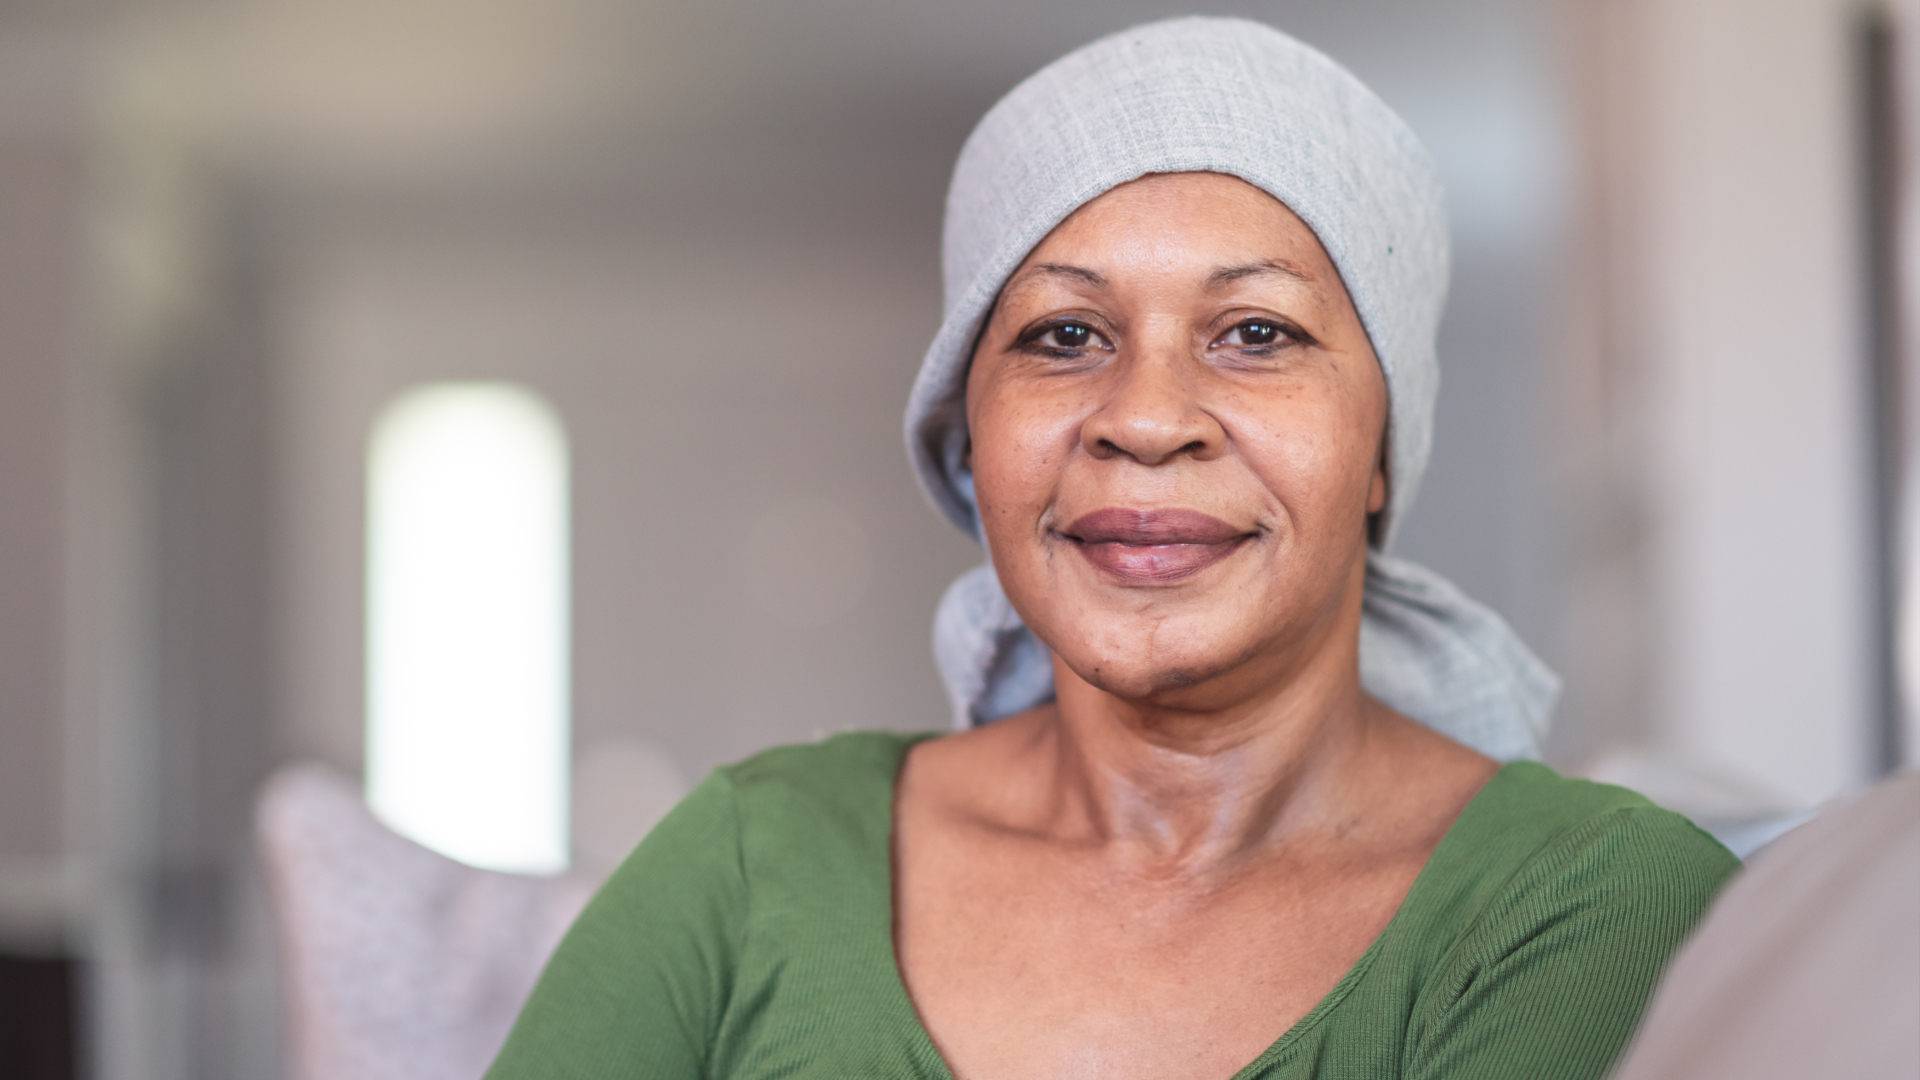 The Best Comfort Gifts for Patients Going Through Chemotherapy